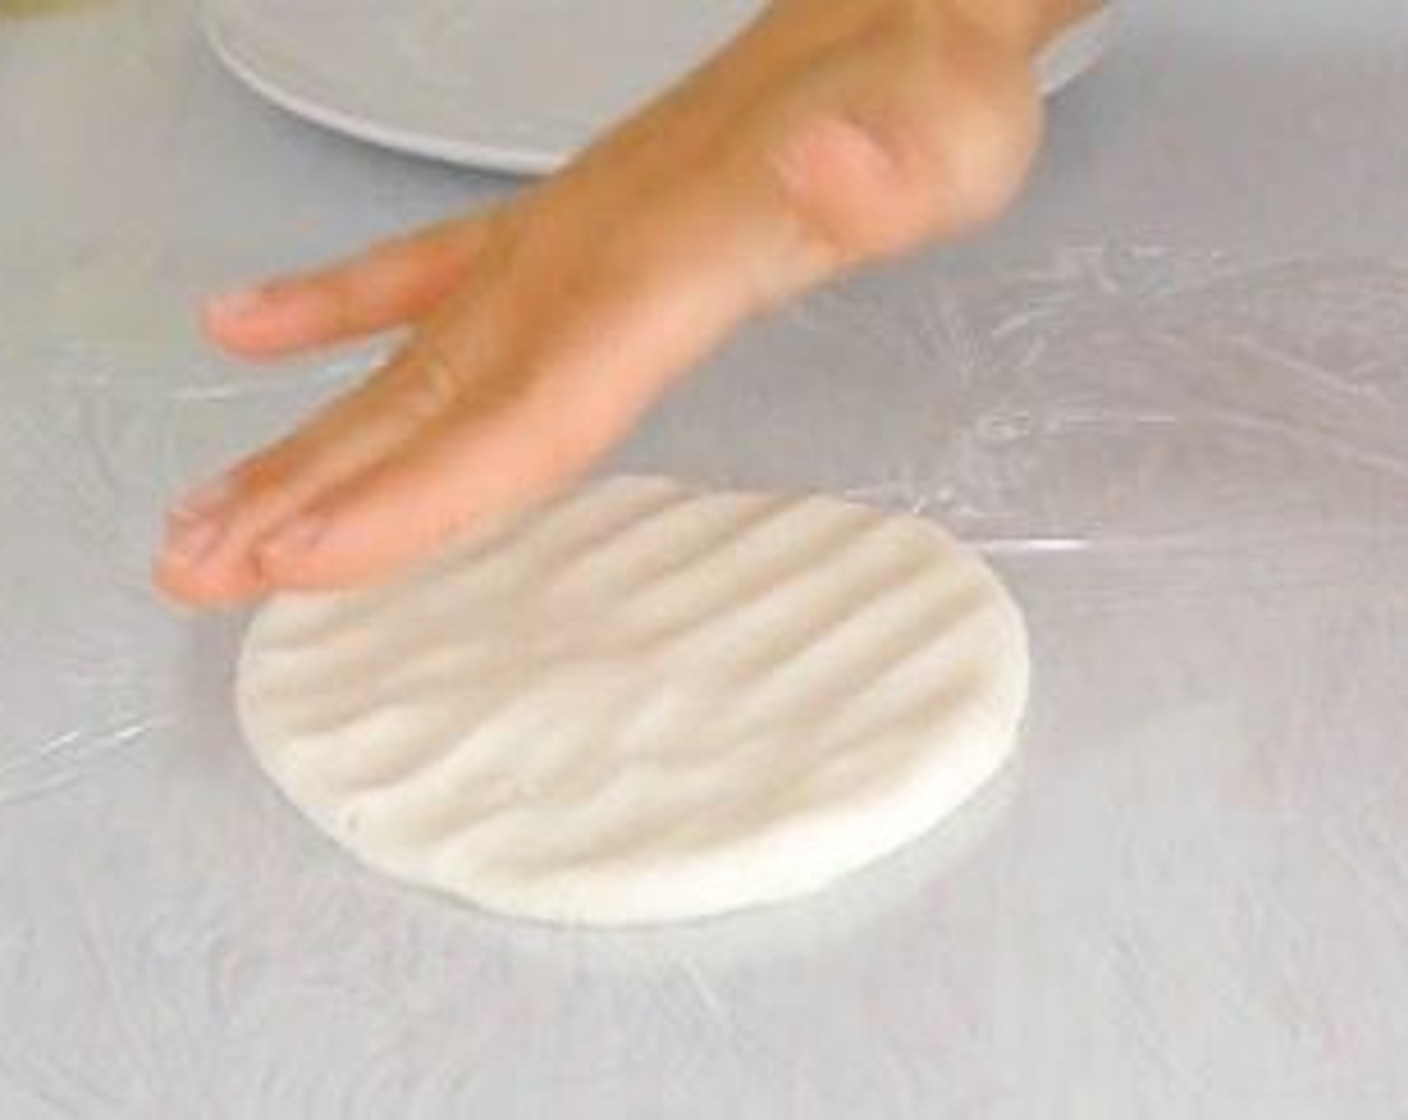 step 9 Then take a ball of dough, place it over the cling film and flatten it out until is 1/2cm thick. It helps to have a container with water to wet your fingers so the dough doesn’t stick.